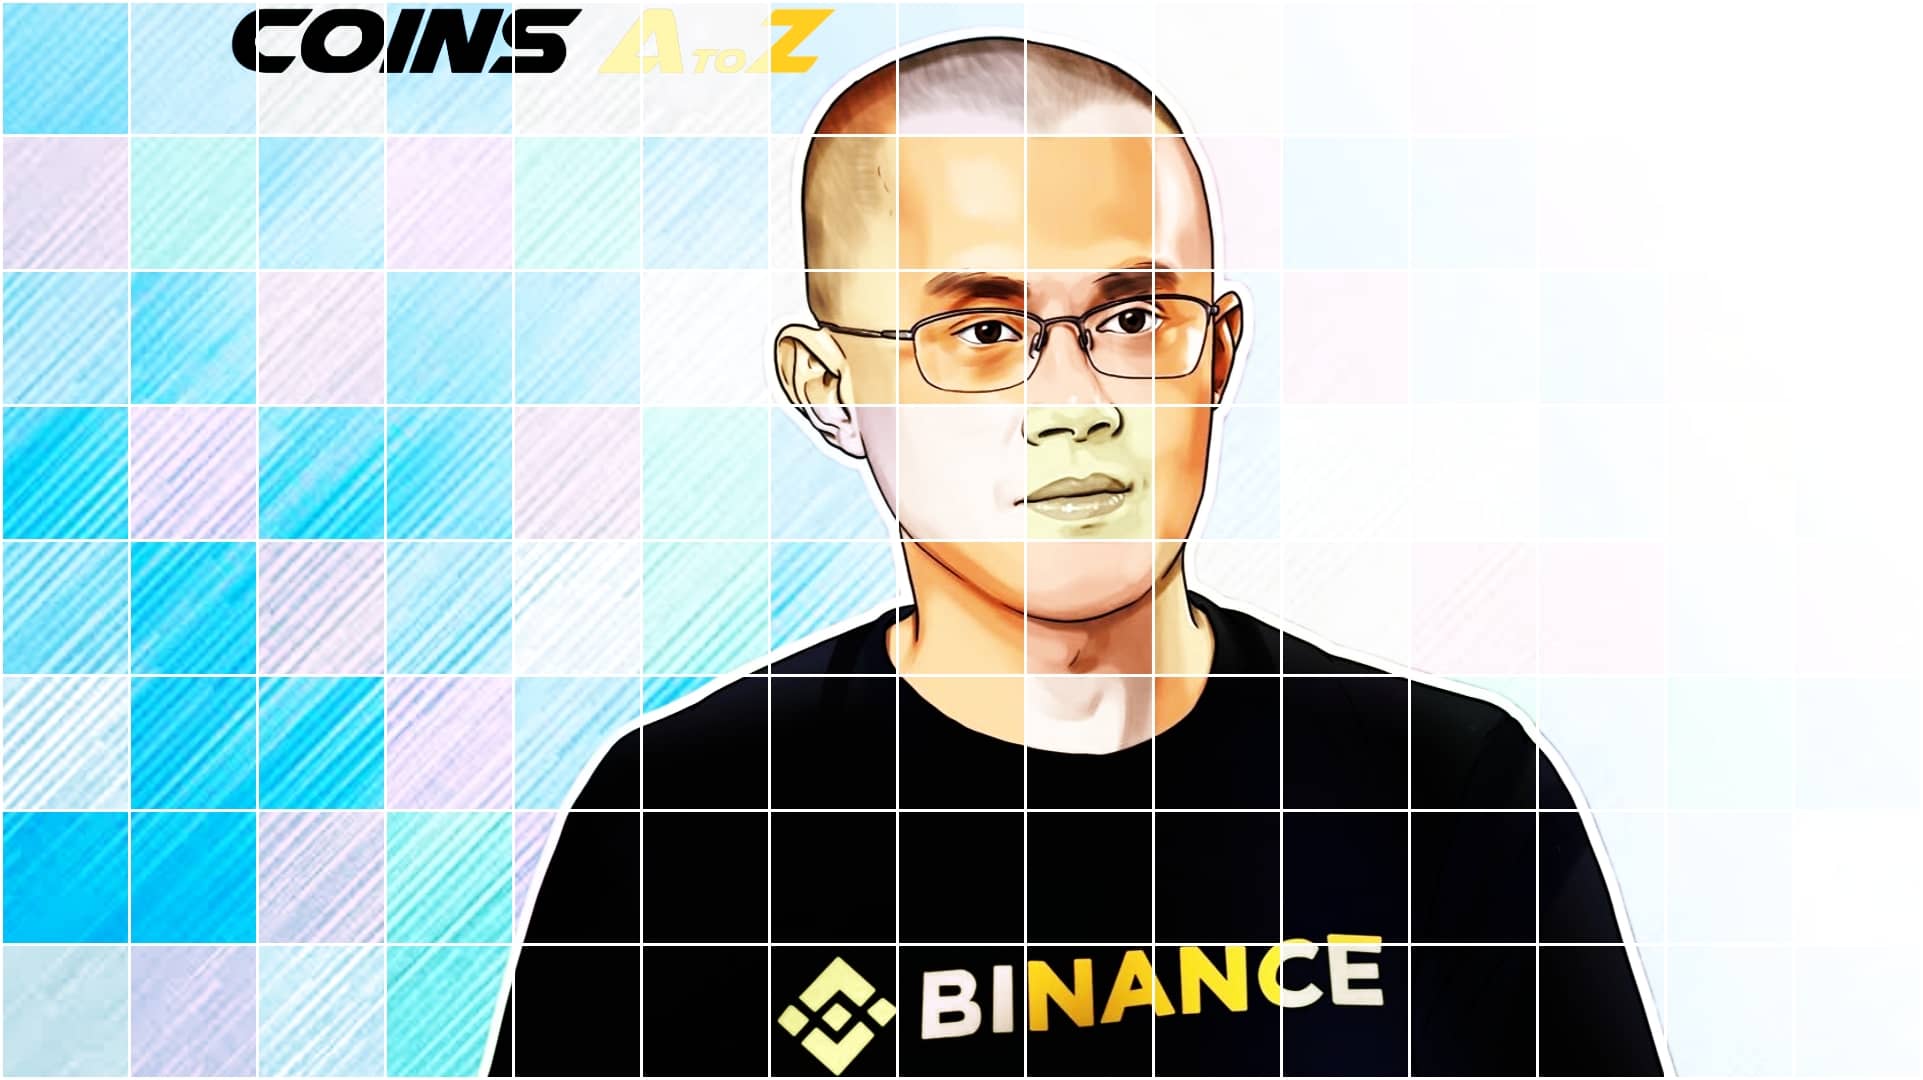 Binance CEO, Just 1% of people can handle Crypto Self-Custody as of Now